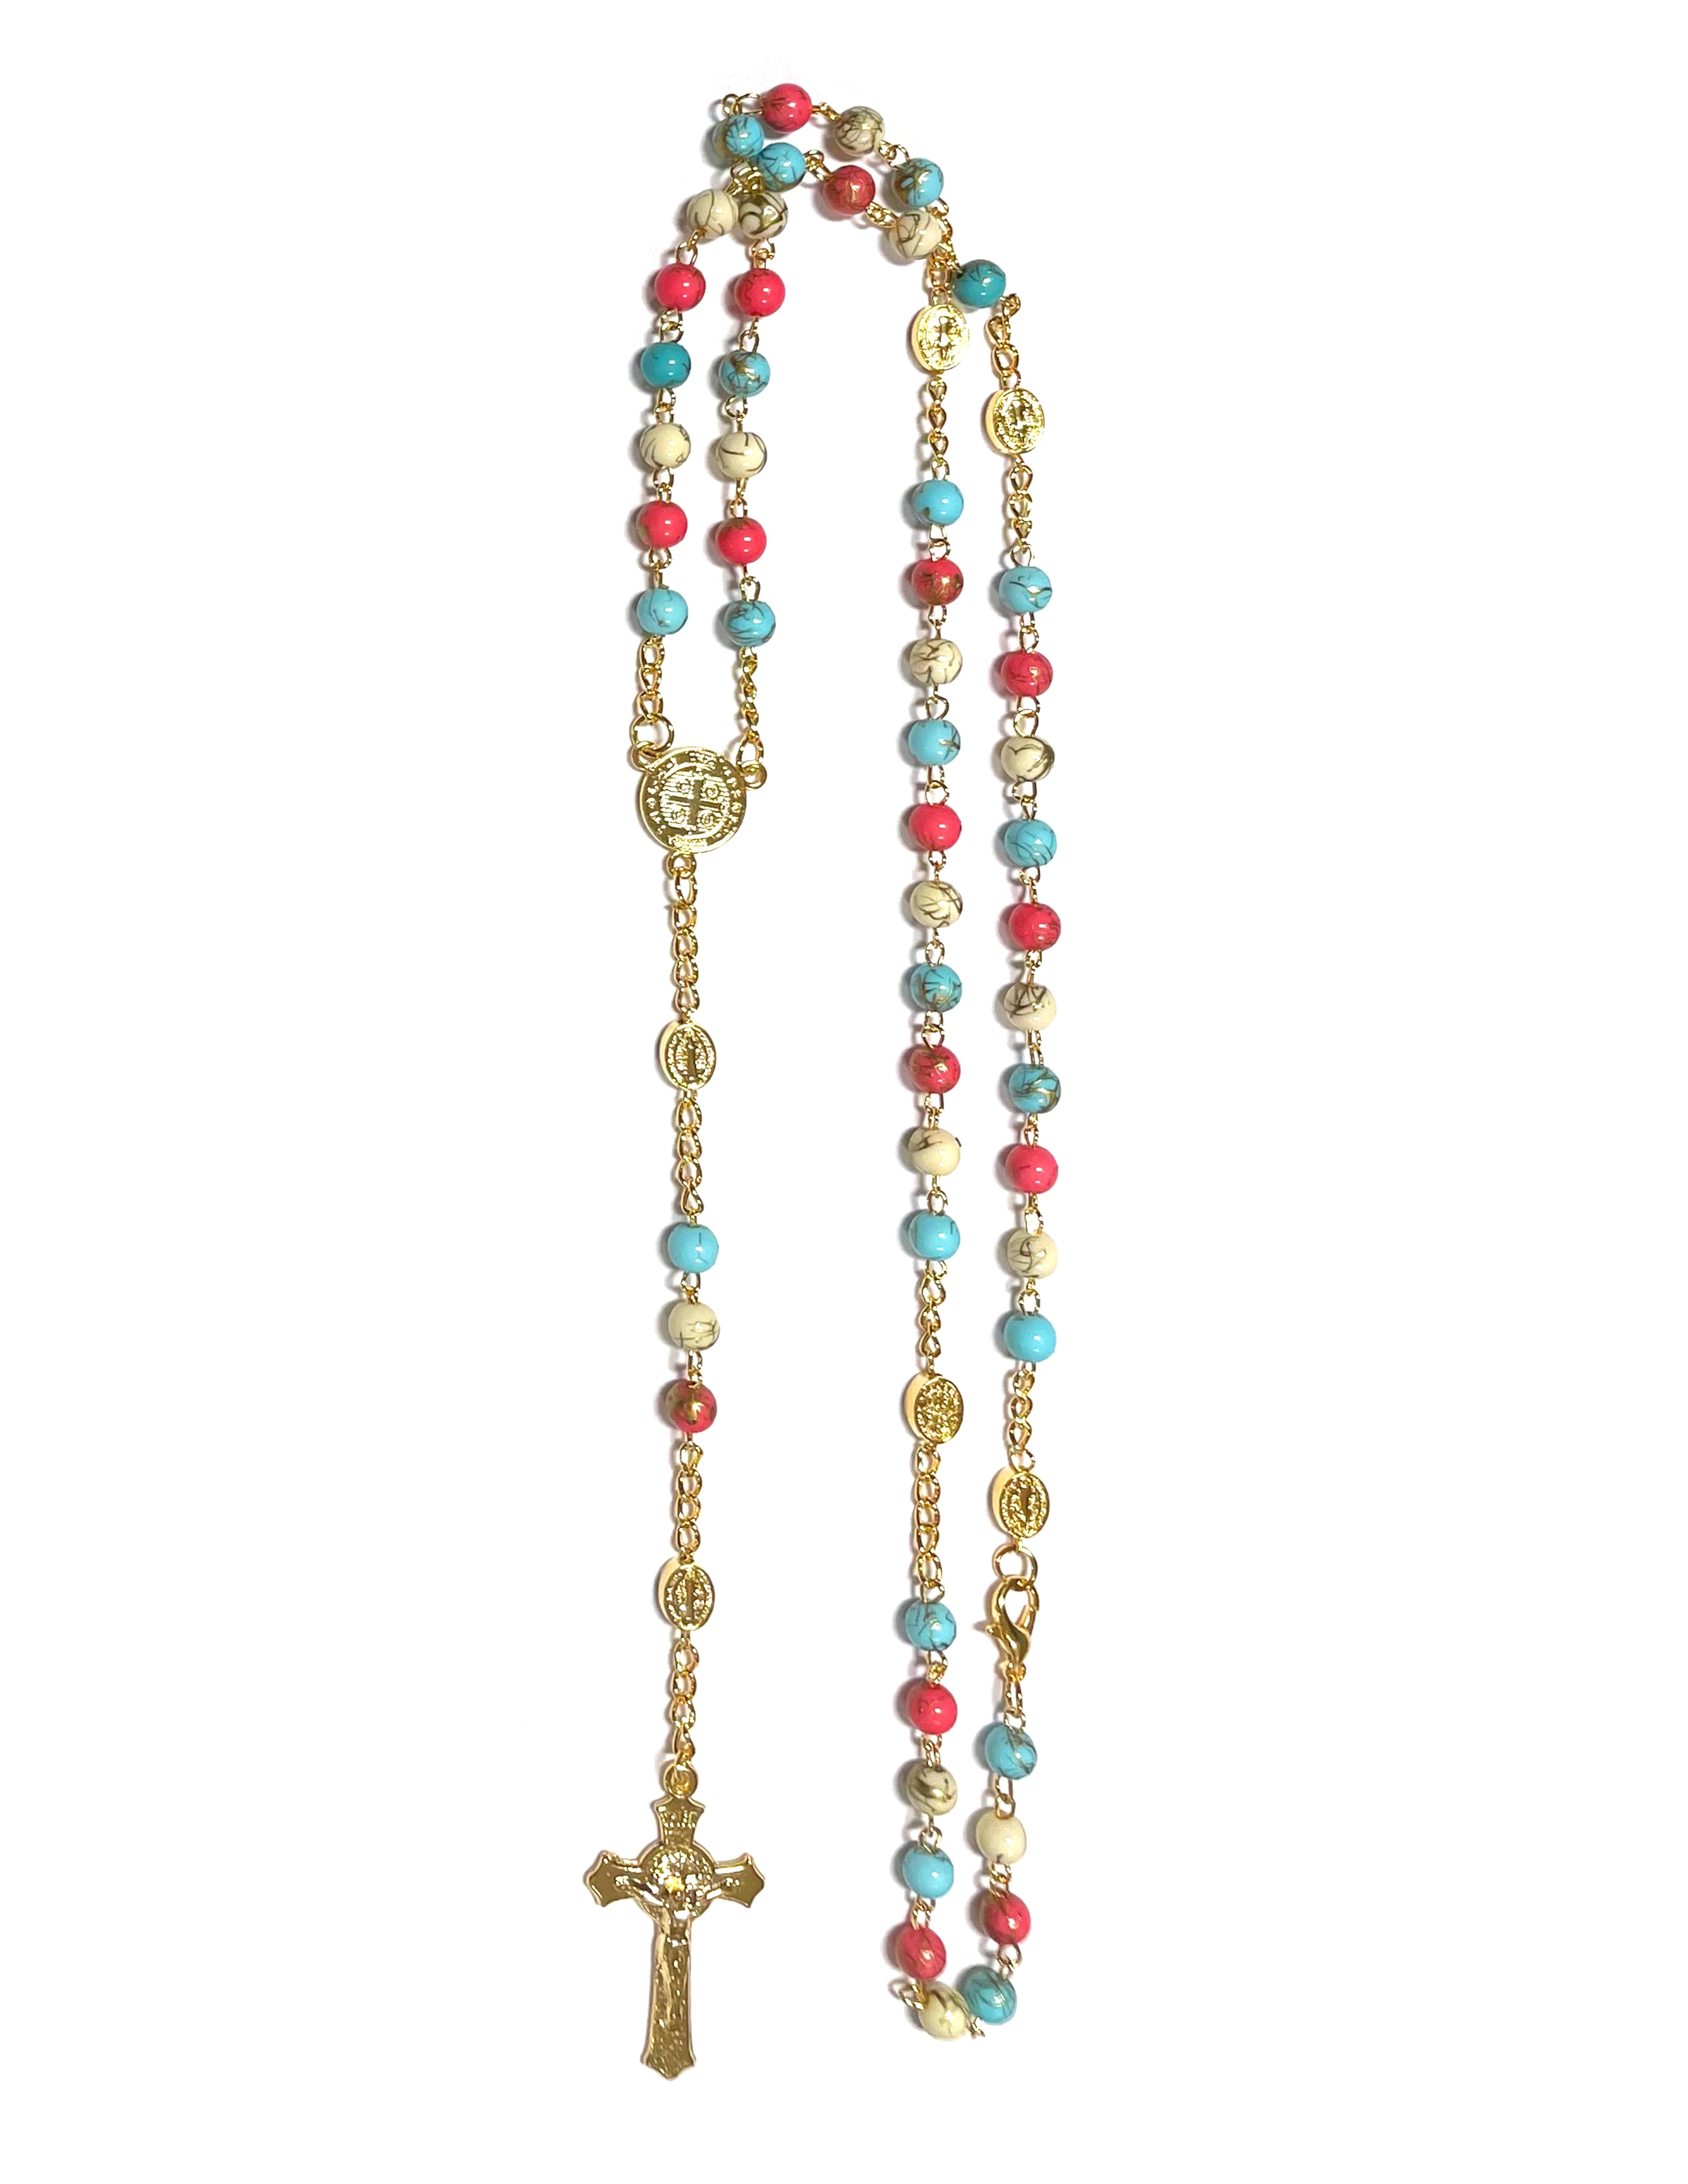 Golden Saint Benedict rosary with colorful stones beads